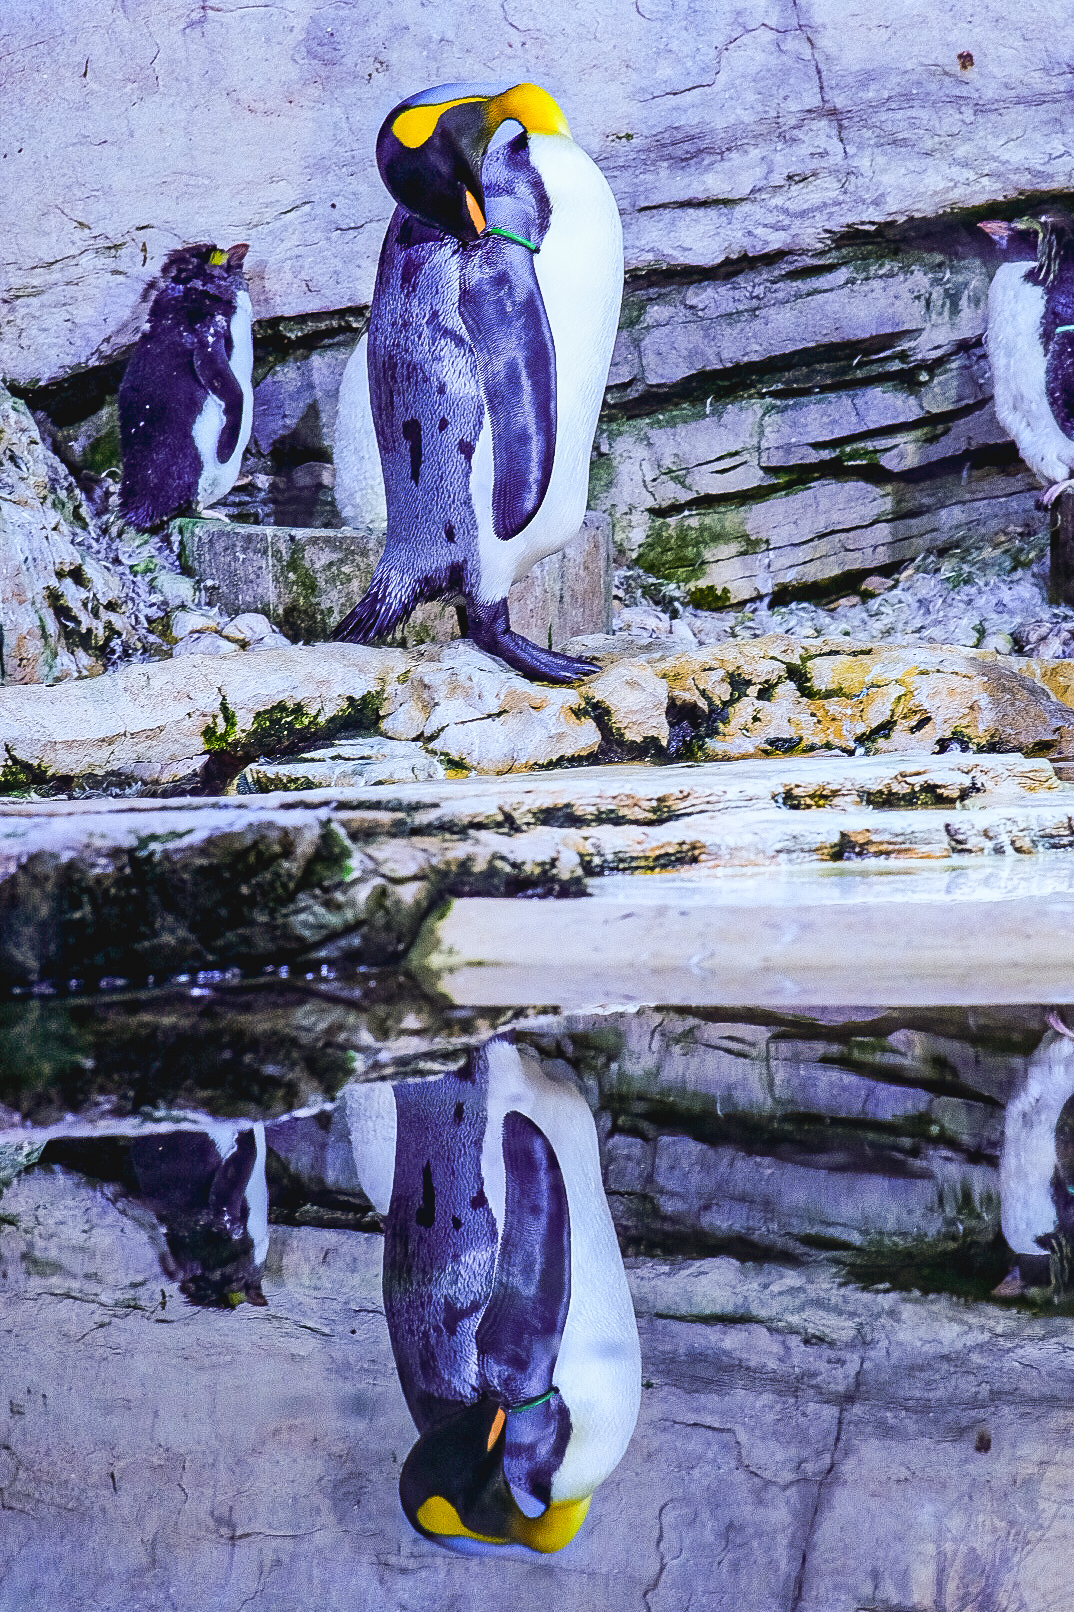 Penguin at the zoo...